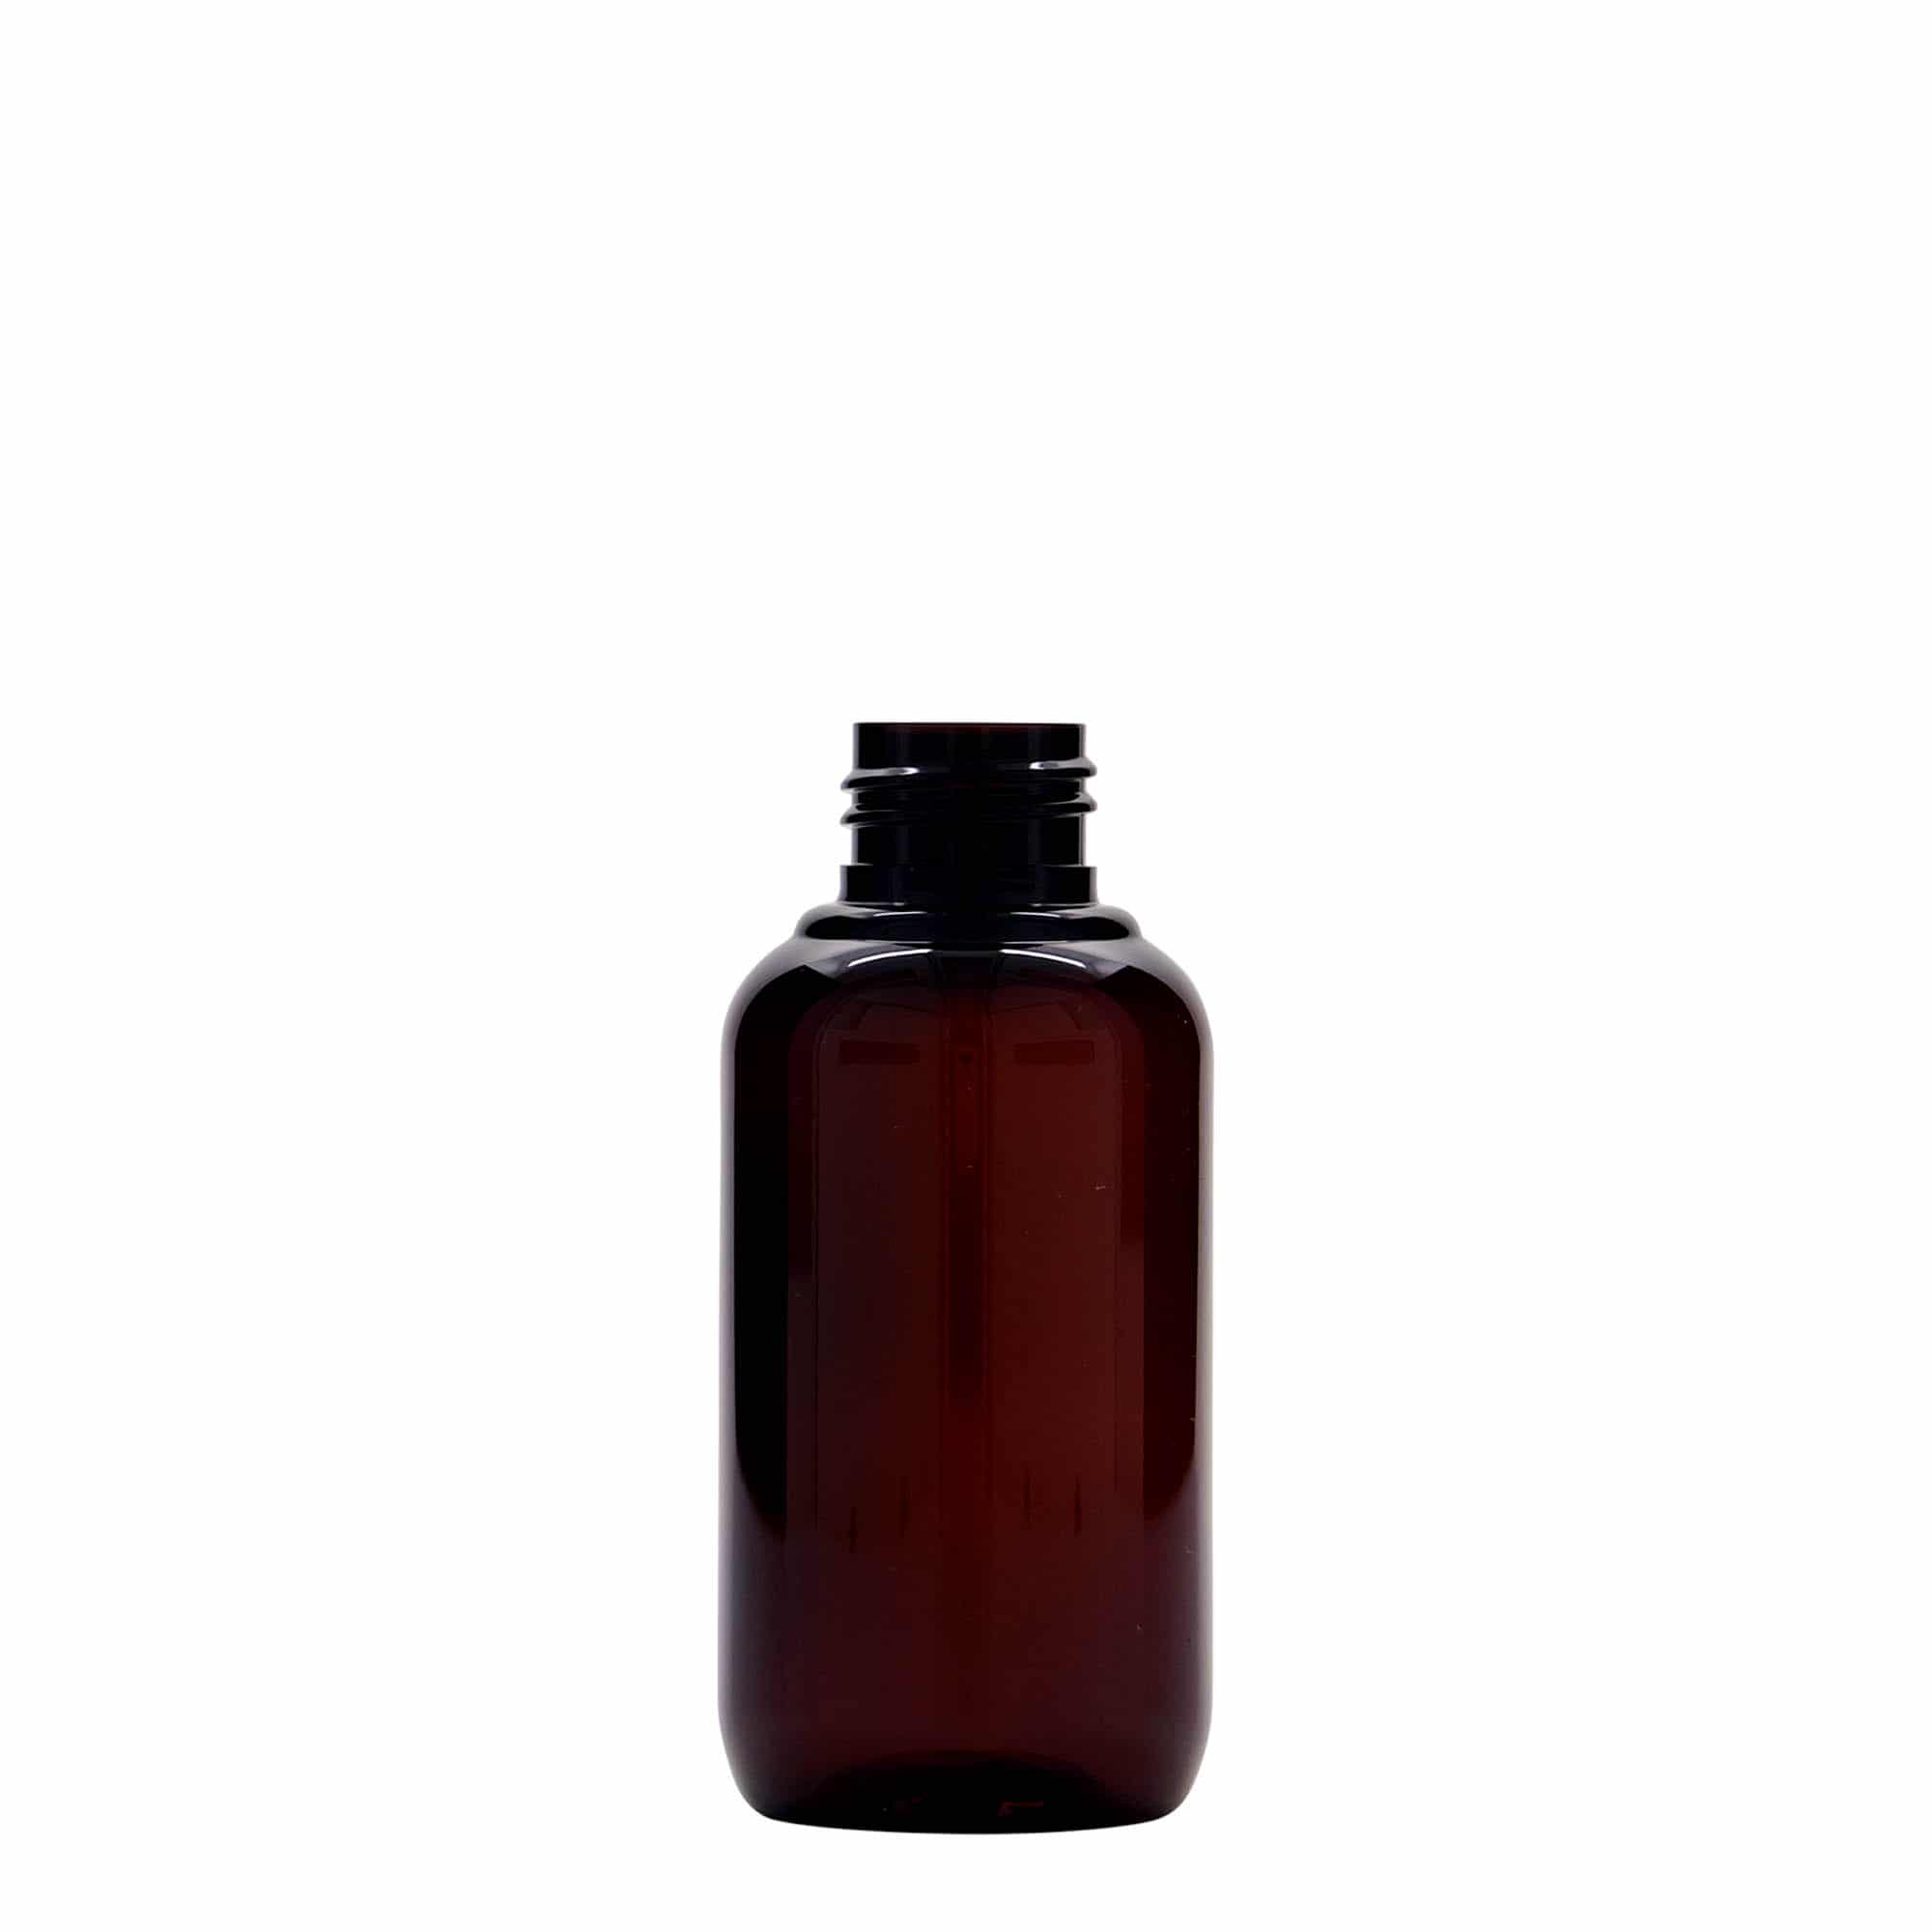 100 ml recycled plastic bottle 'Victor's Best', PCR, brown, closure: GPI 24/410